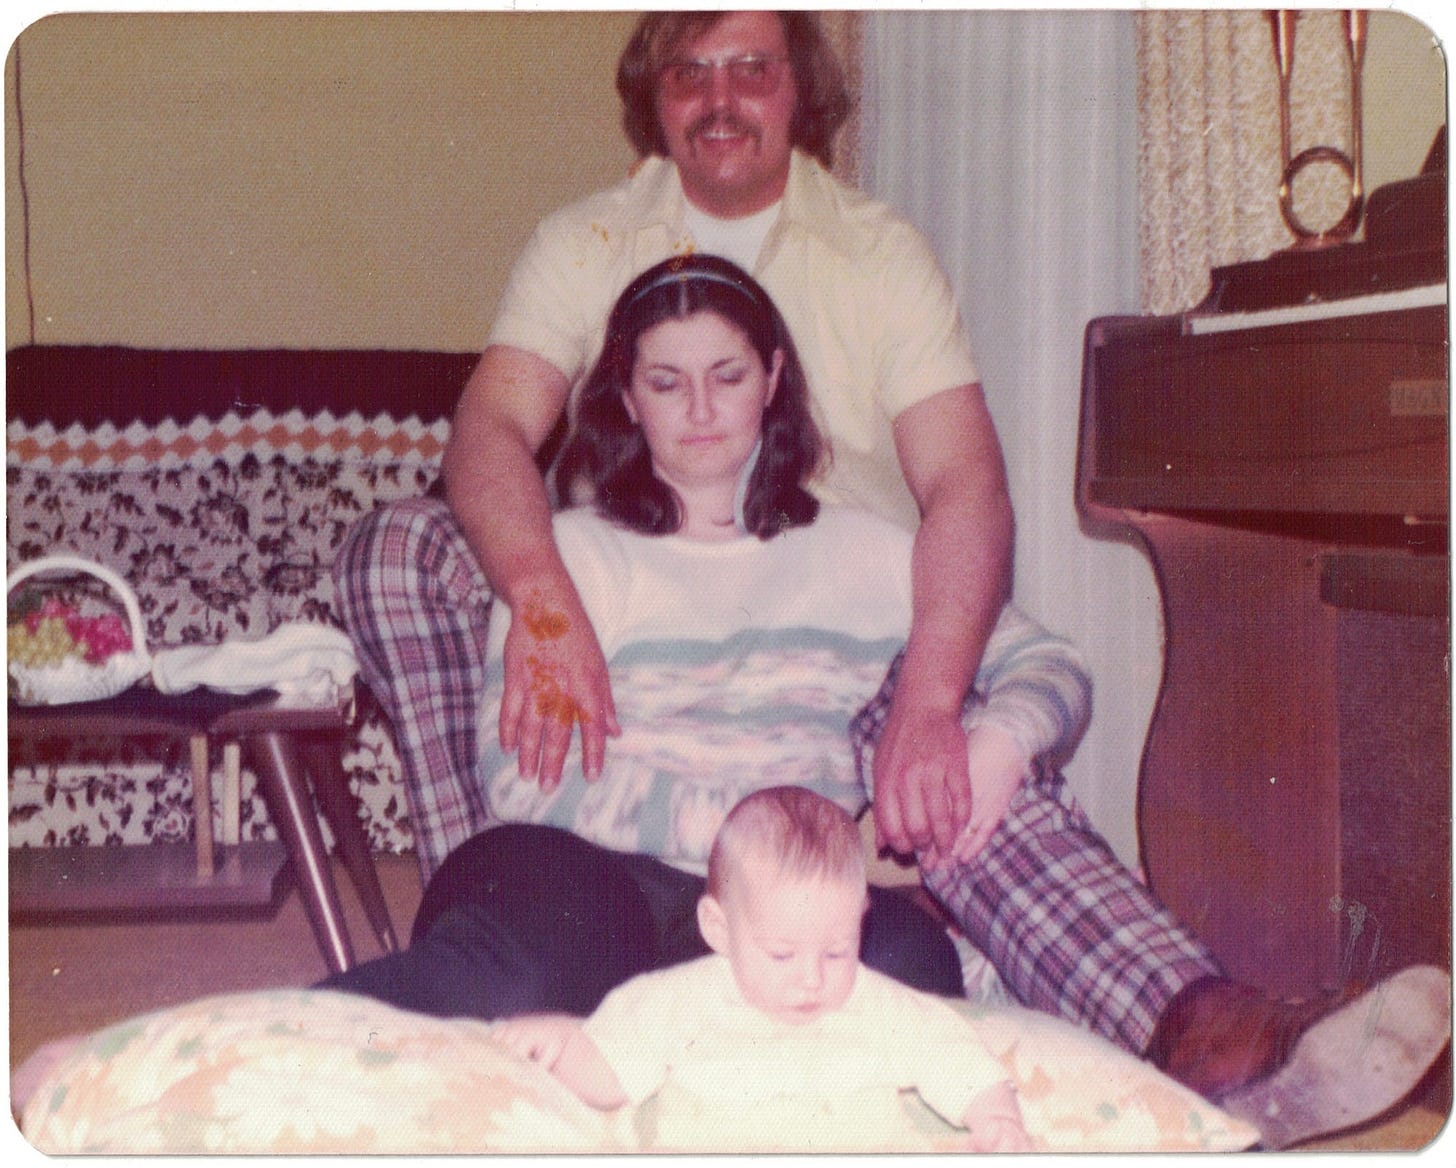 My mother, father, and me at only a few months old.